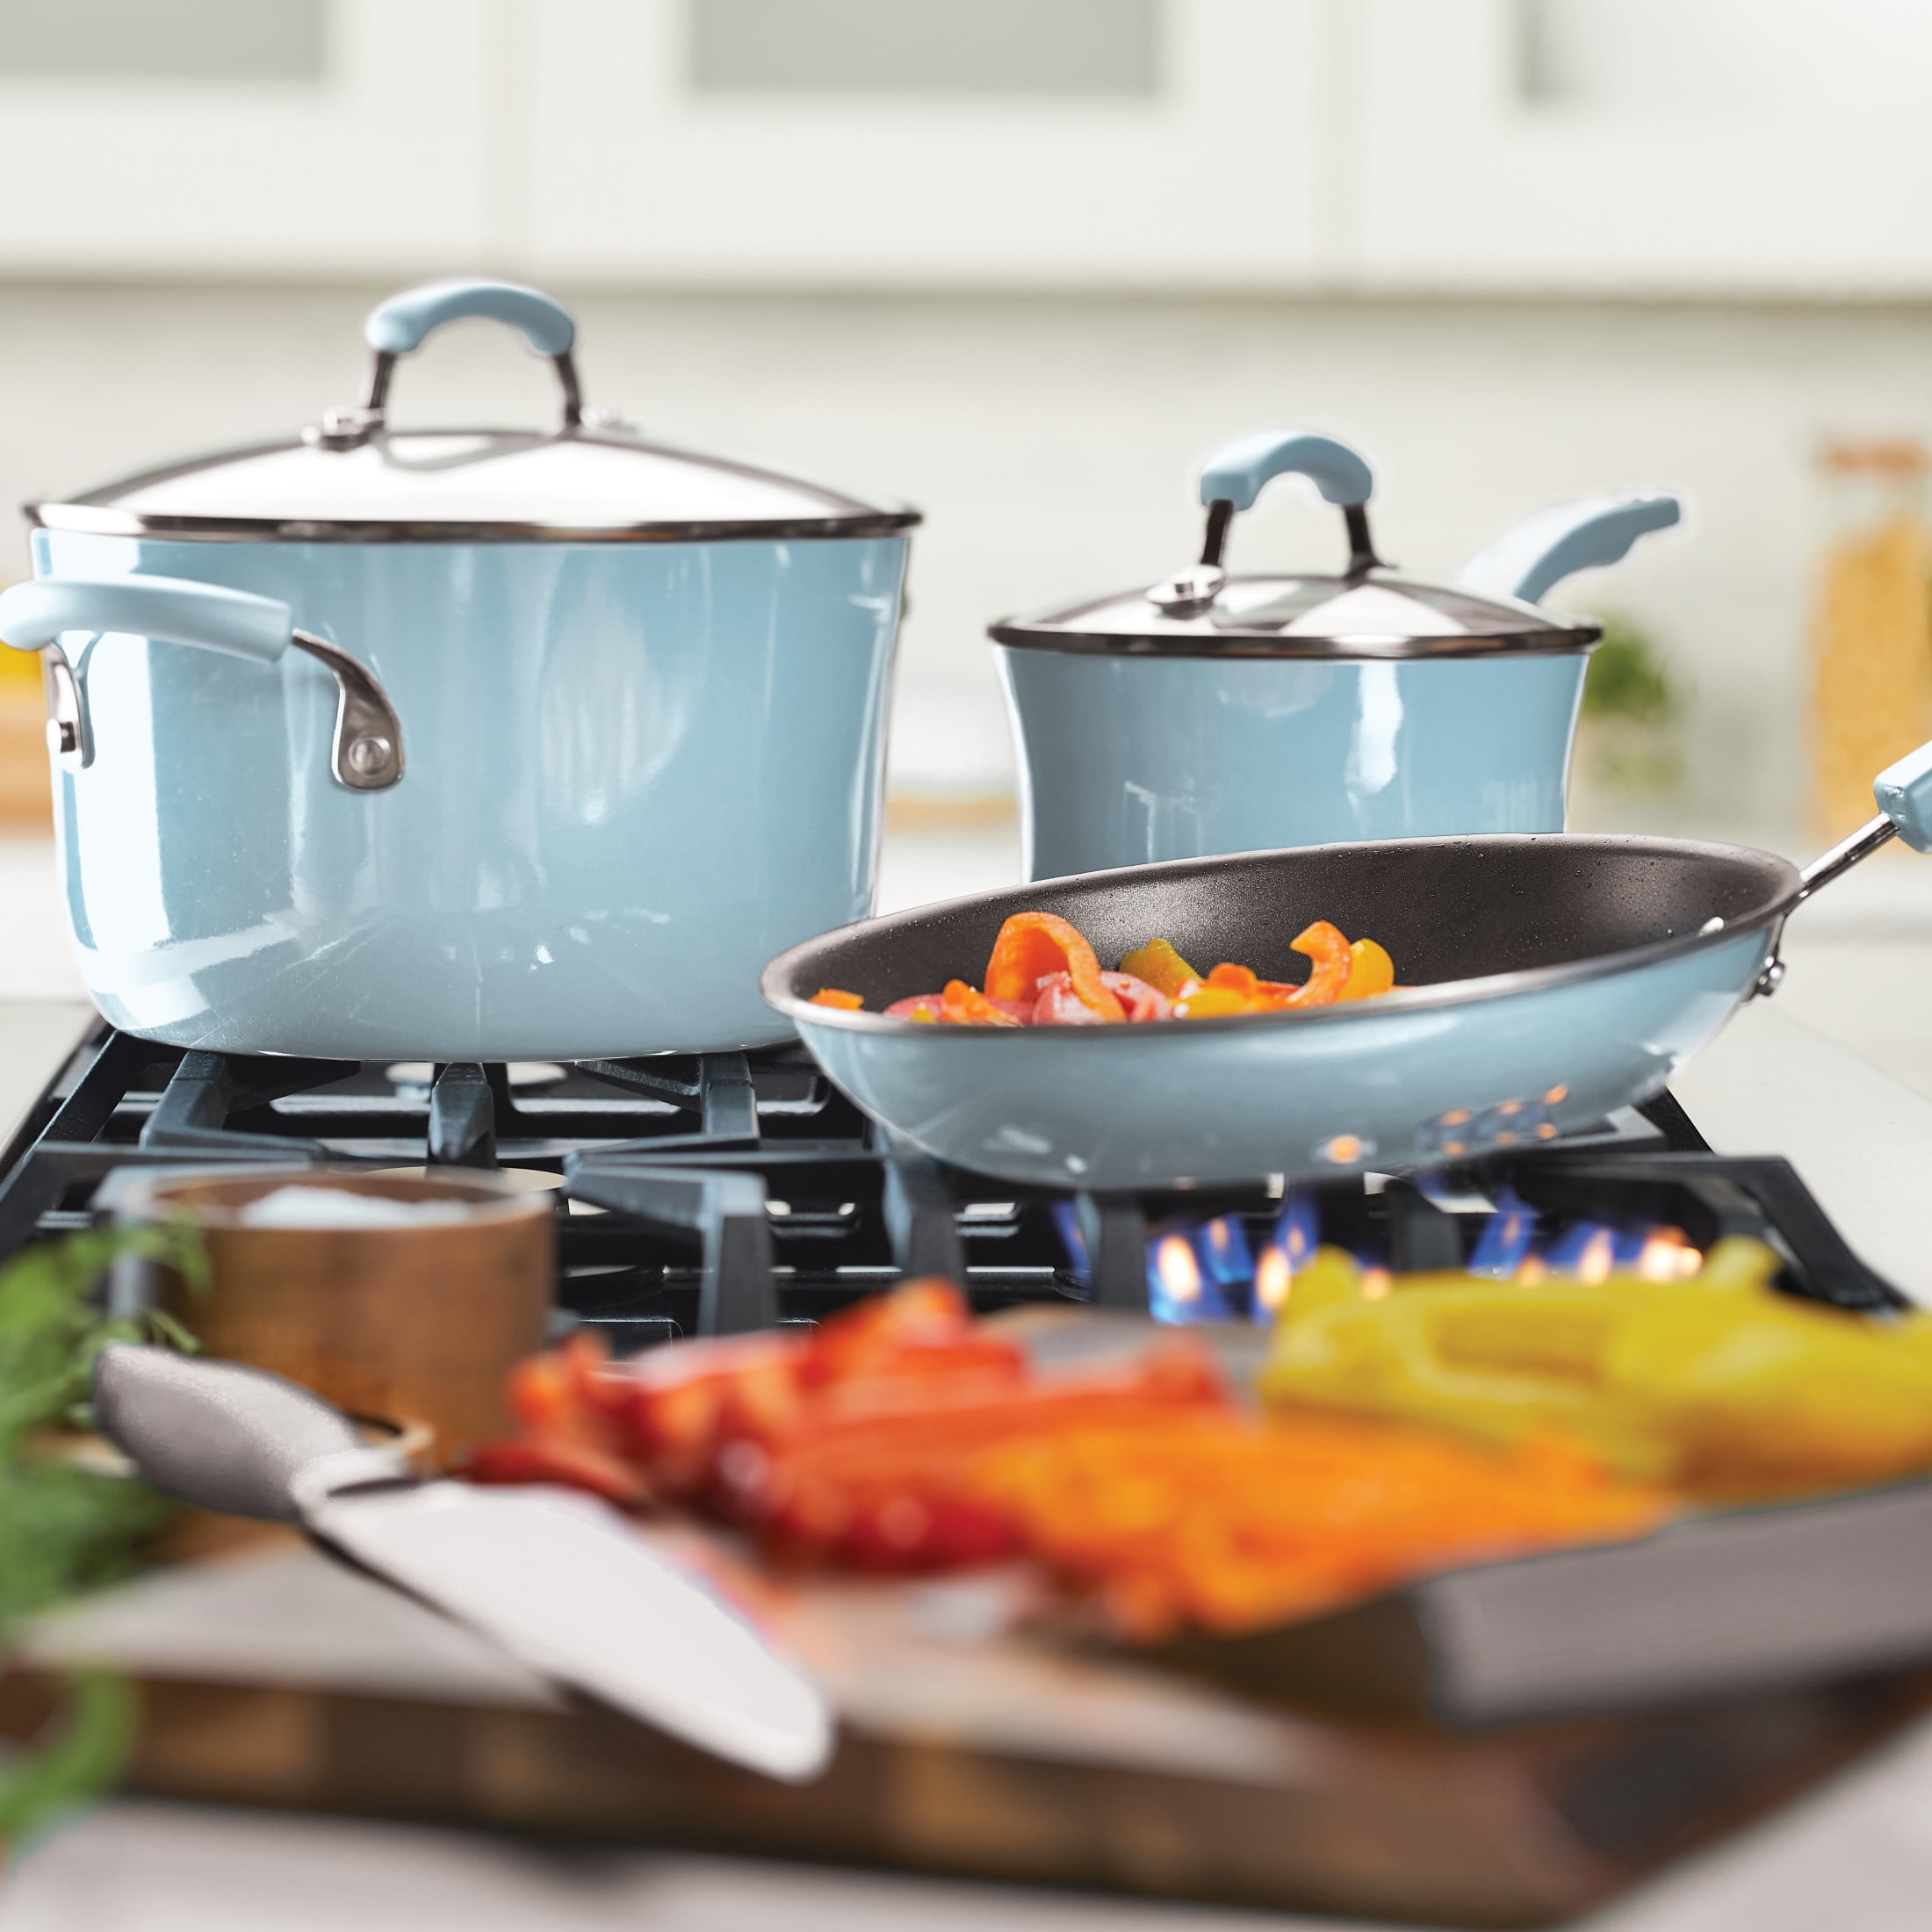 ᐅ THIS IS OUR PICK FOR BEST PORCELAIN COOKWARE